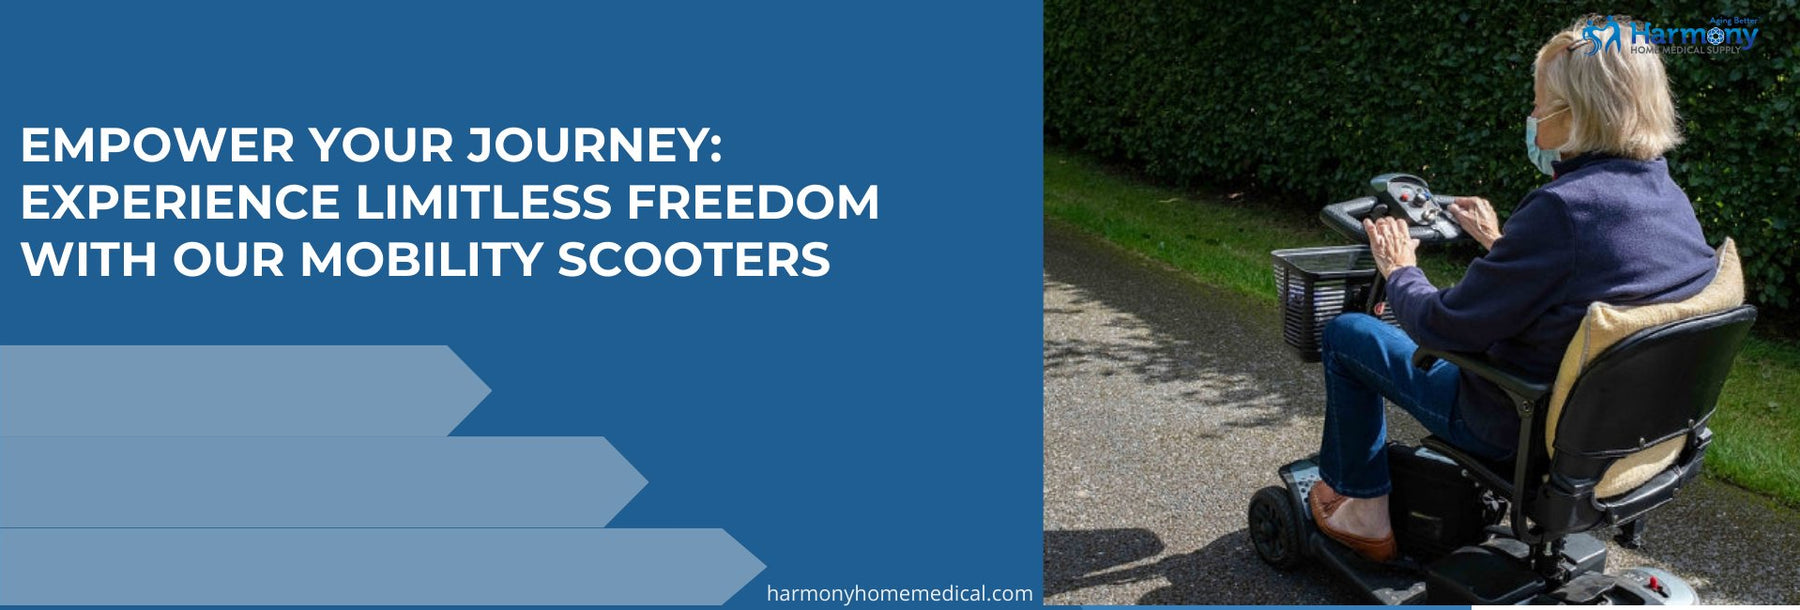 Unlock Freedom: Empower Your Journey with Our Mobility Scooters - Harmony Home Medical Supply